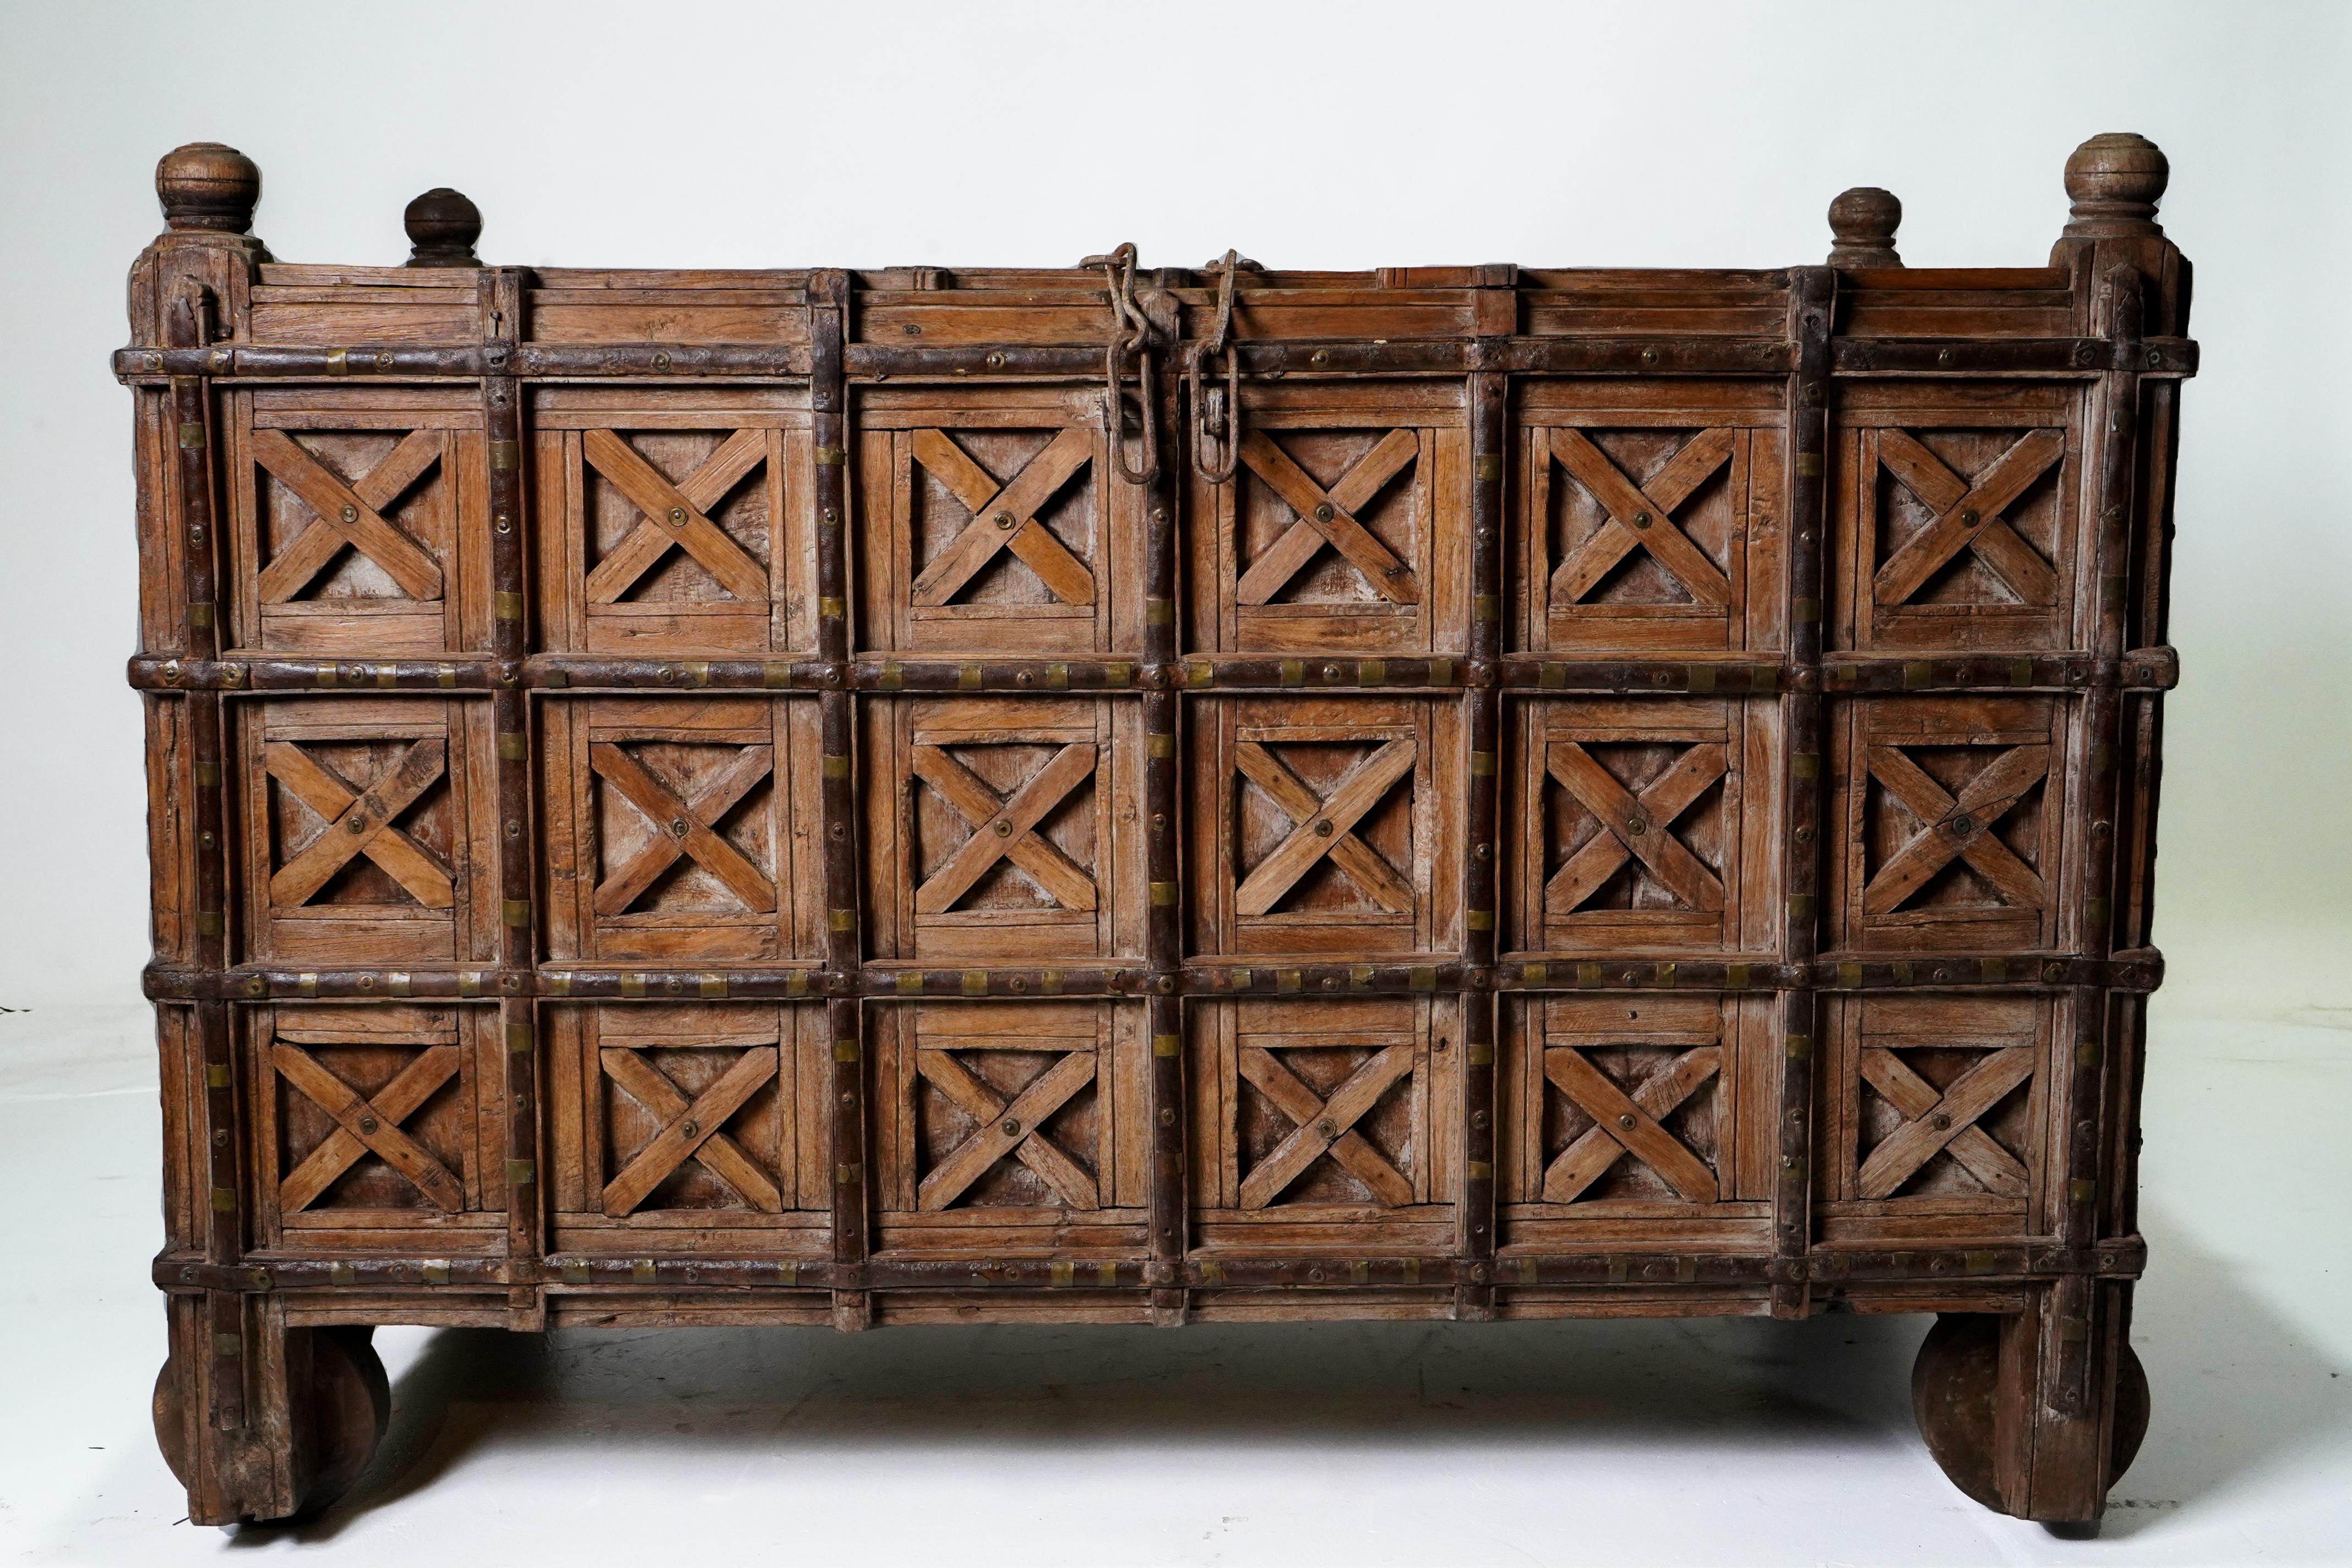 A superb example of an Indian (Gujarat) dowry chest with ornate frame, iron reinforcements and wheels. These chests were used to hold blankets and other valuables. The small upper door could be locked. Chests this large were owned by wealthy people